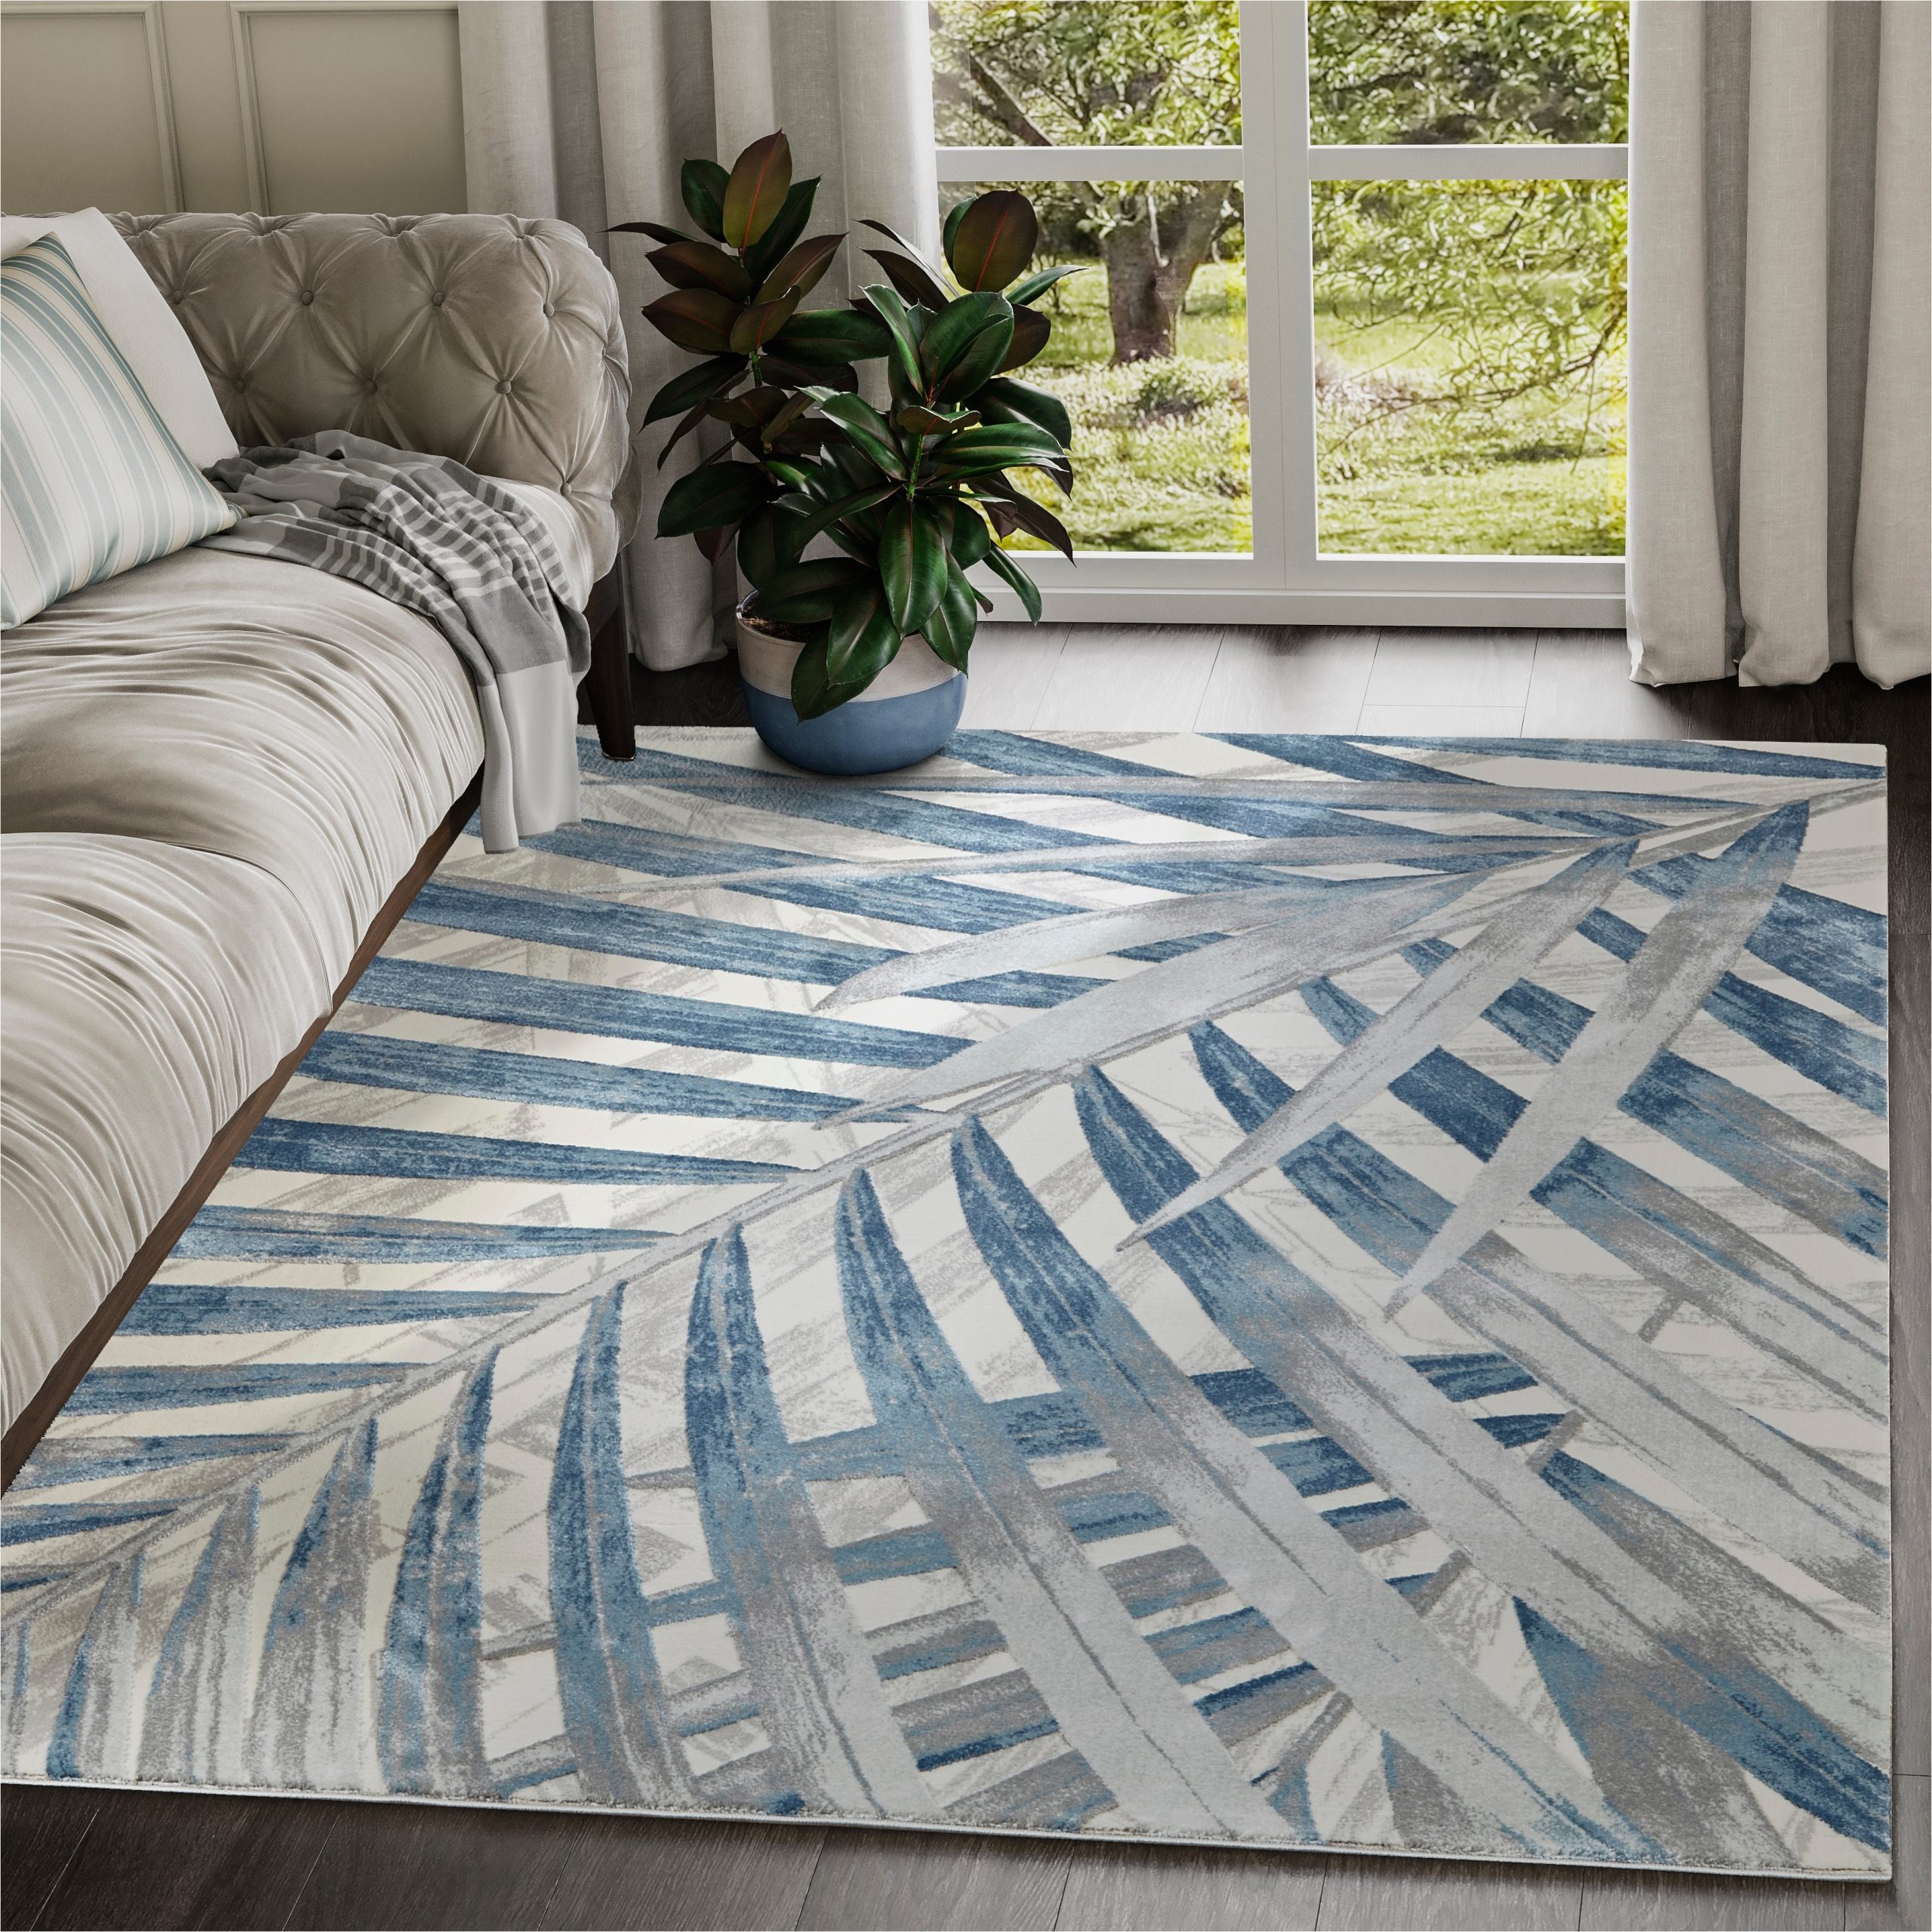 Area Rugs with Blue In them Blue Tropical Leaves Grey Blue area Rug – Overstock – 27880536